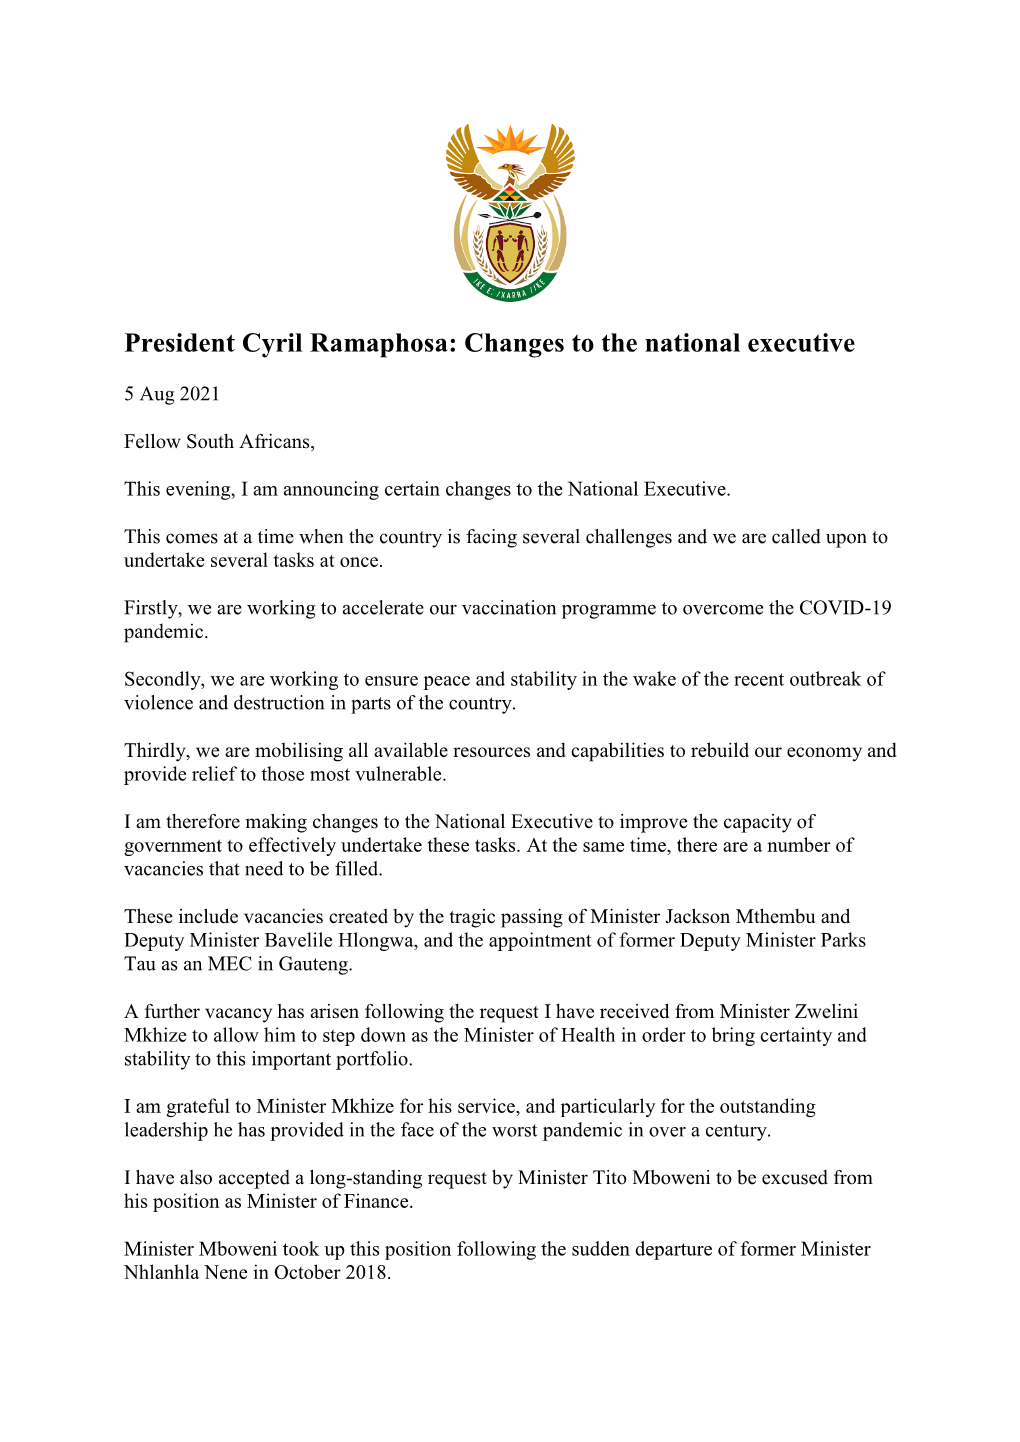 President Cyril Ramaphosa: Changes to the National Executive